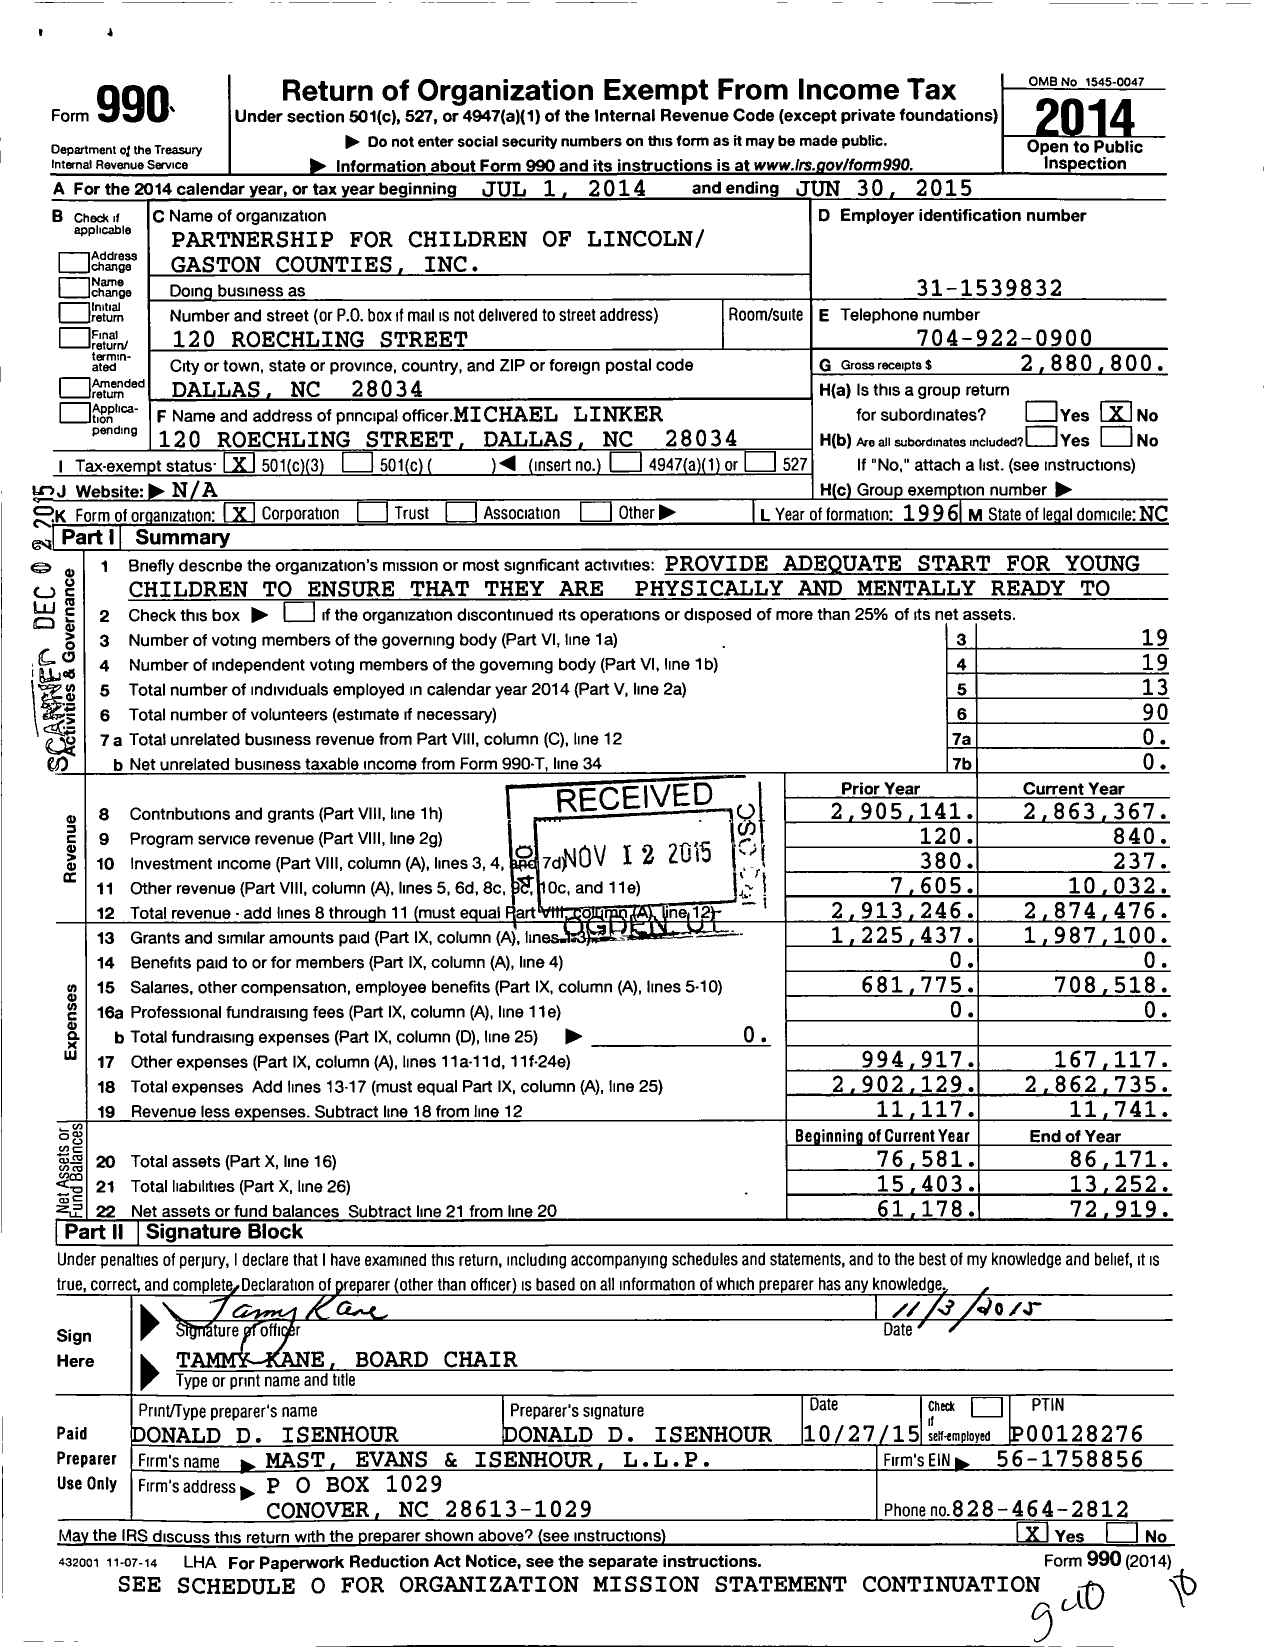 Image of first page of 2014 Form 990 for Partnership for Children of Lincoln and Gaston Counties (PFCLG)